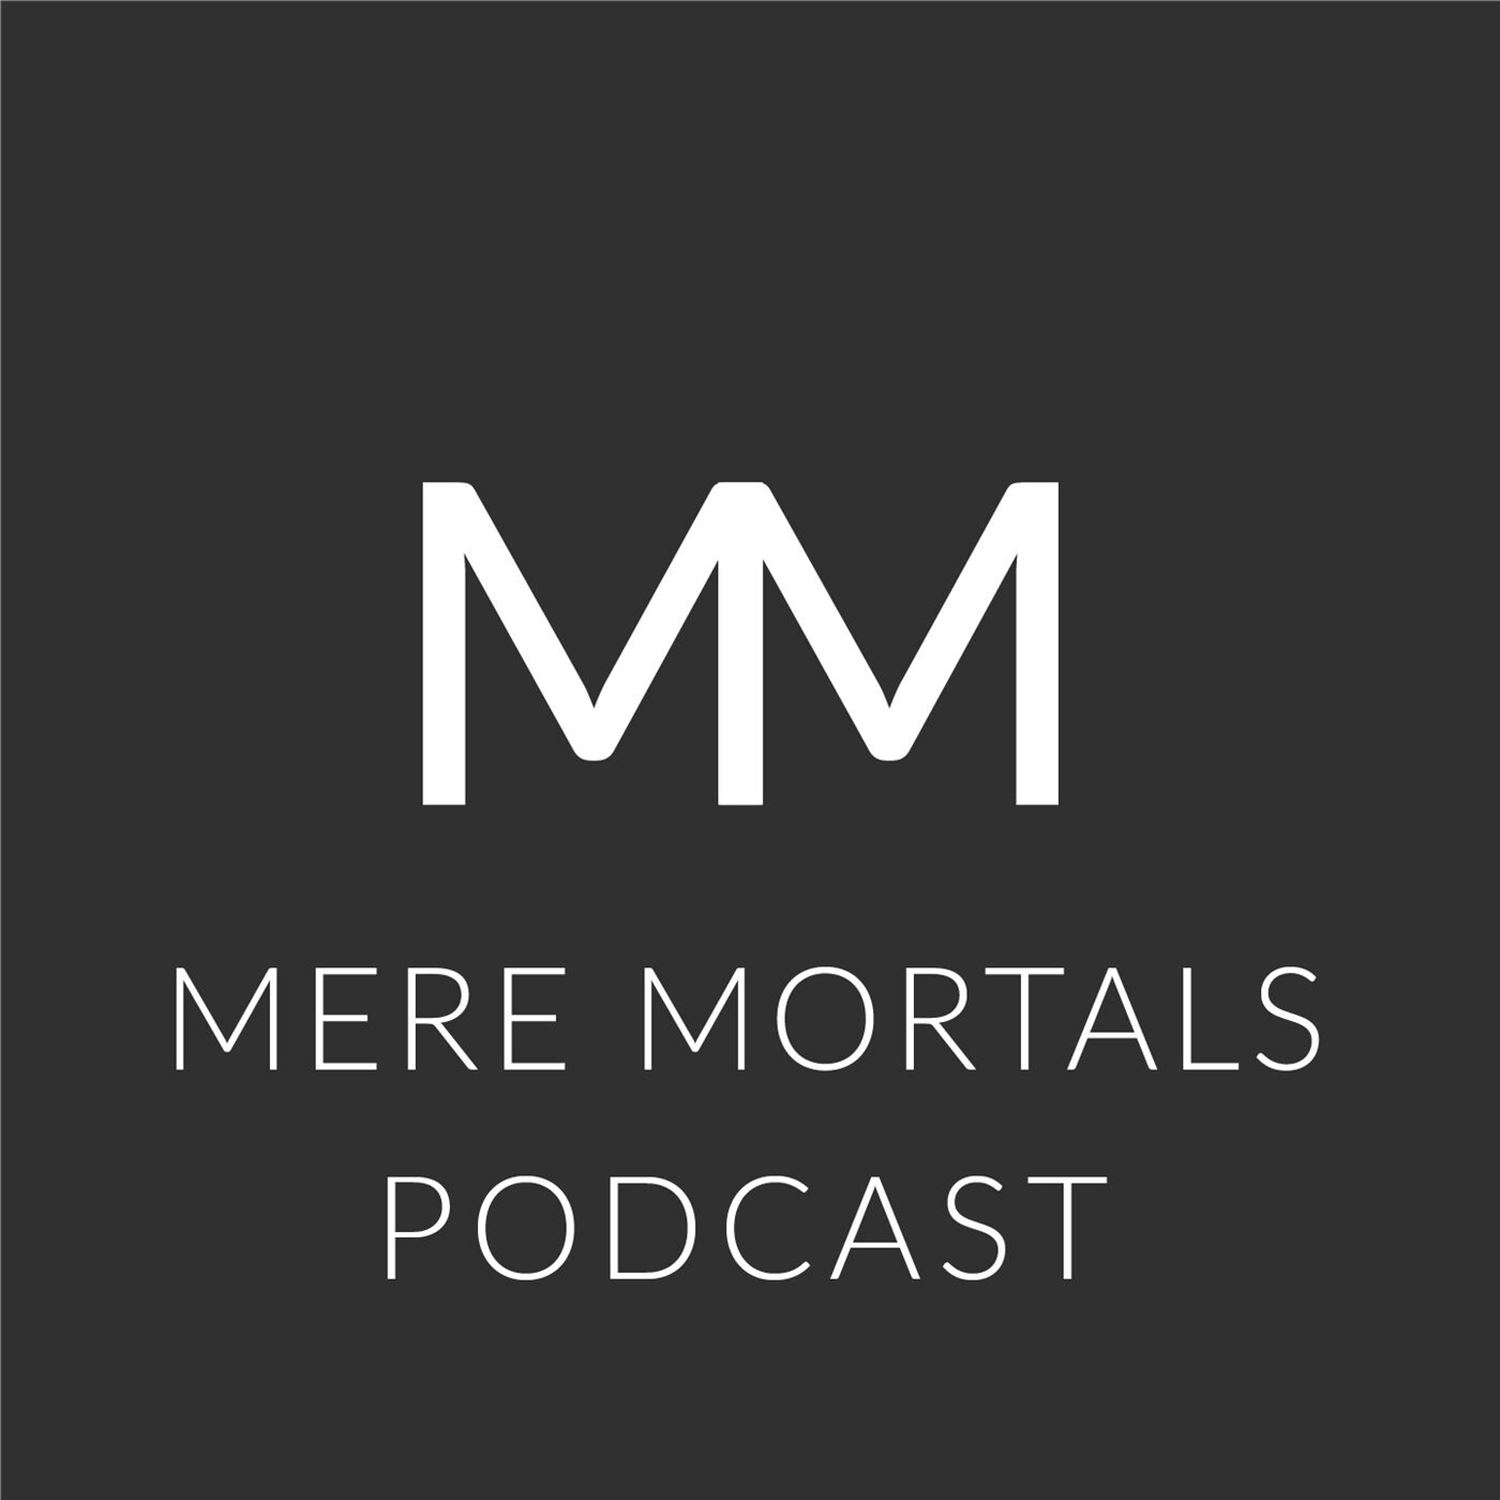 The One Easy Trick To Earn $100 Trillion Dollars!!!! (Mere Mortals Episode #88 - Gullibility)